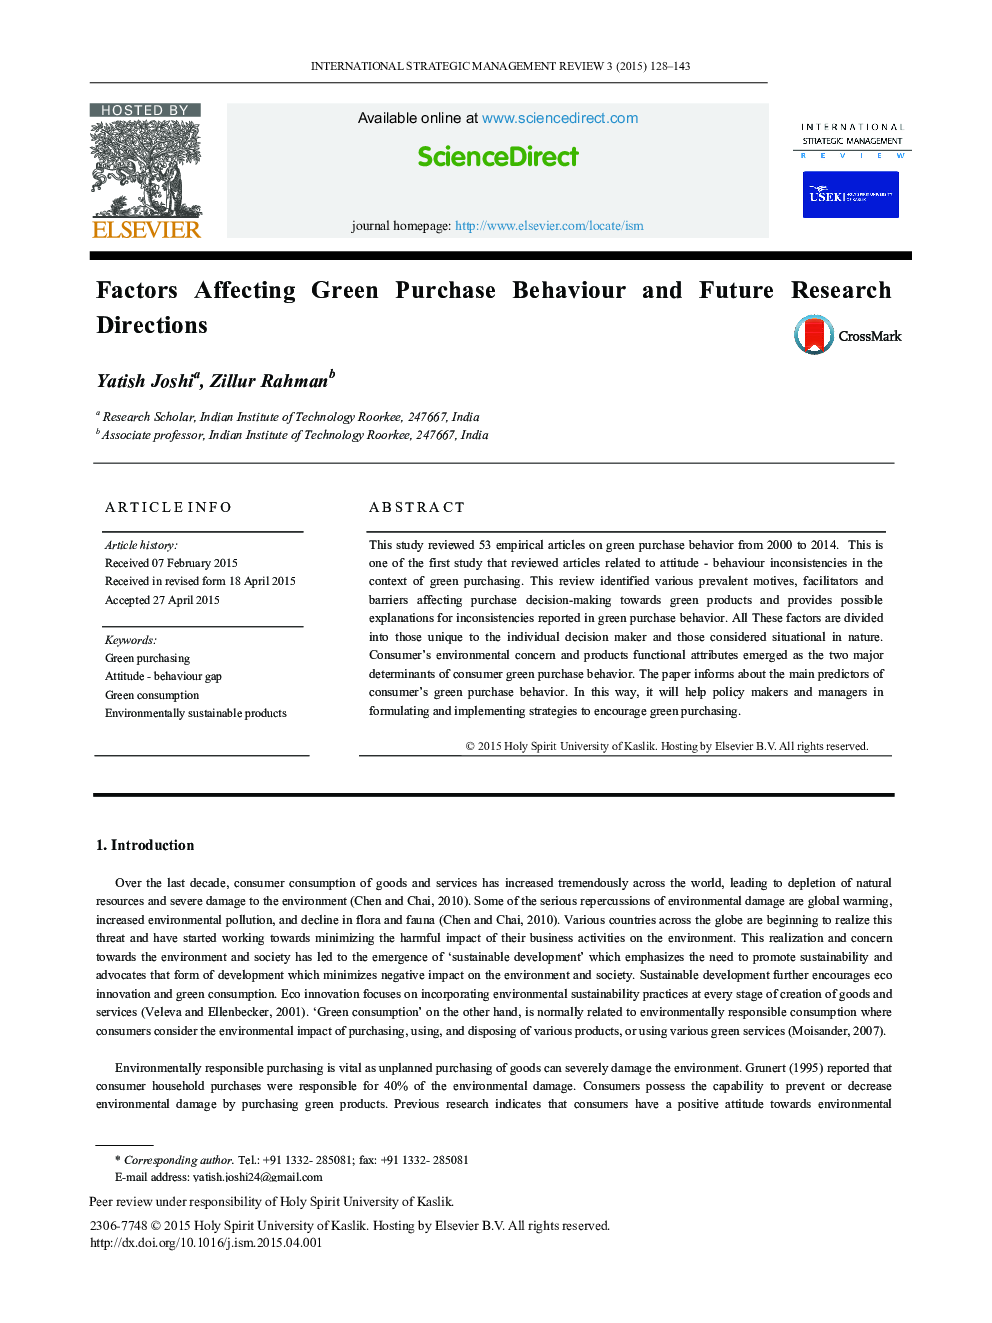 Factors Affecting Green Purchase Behaviour and Future Research Directions 